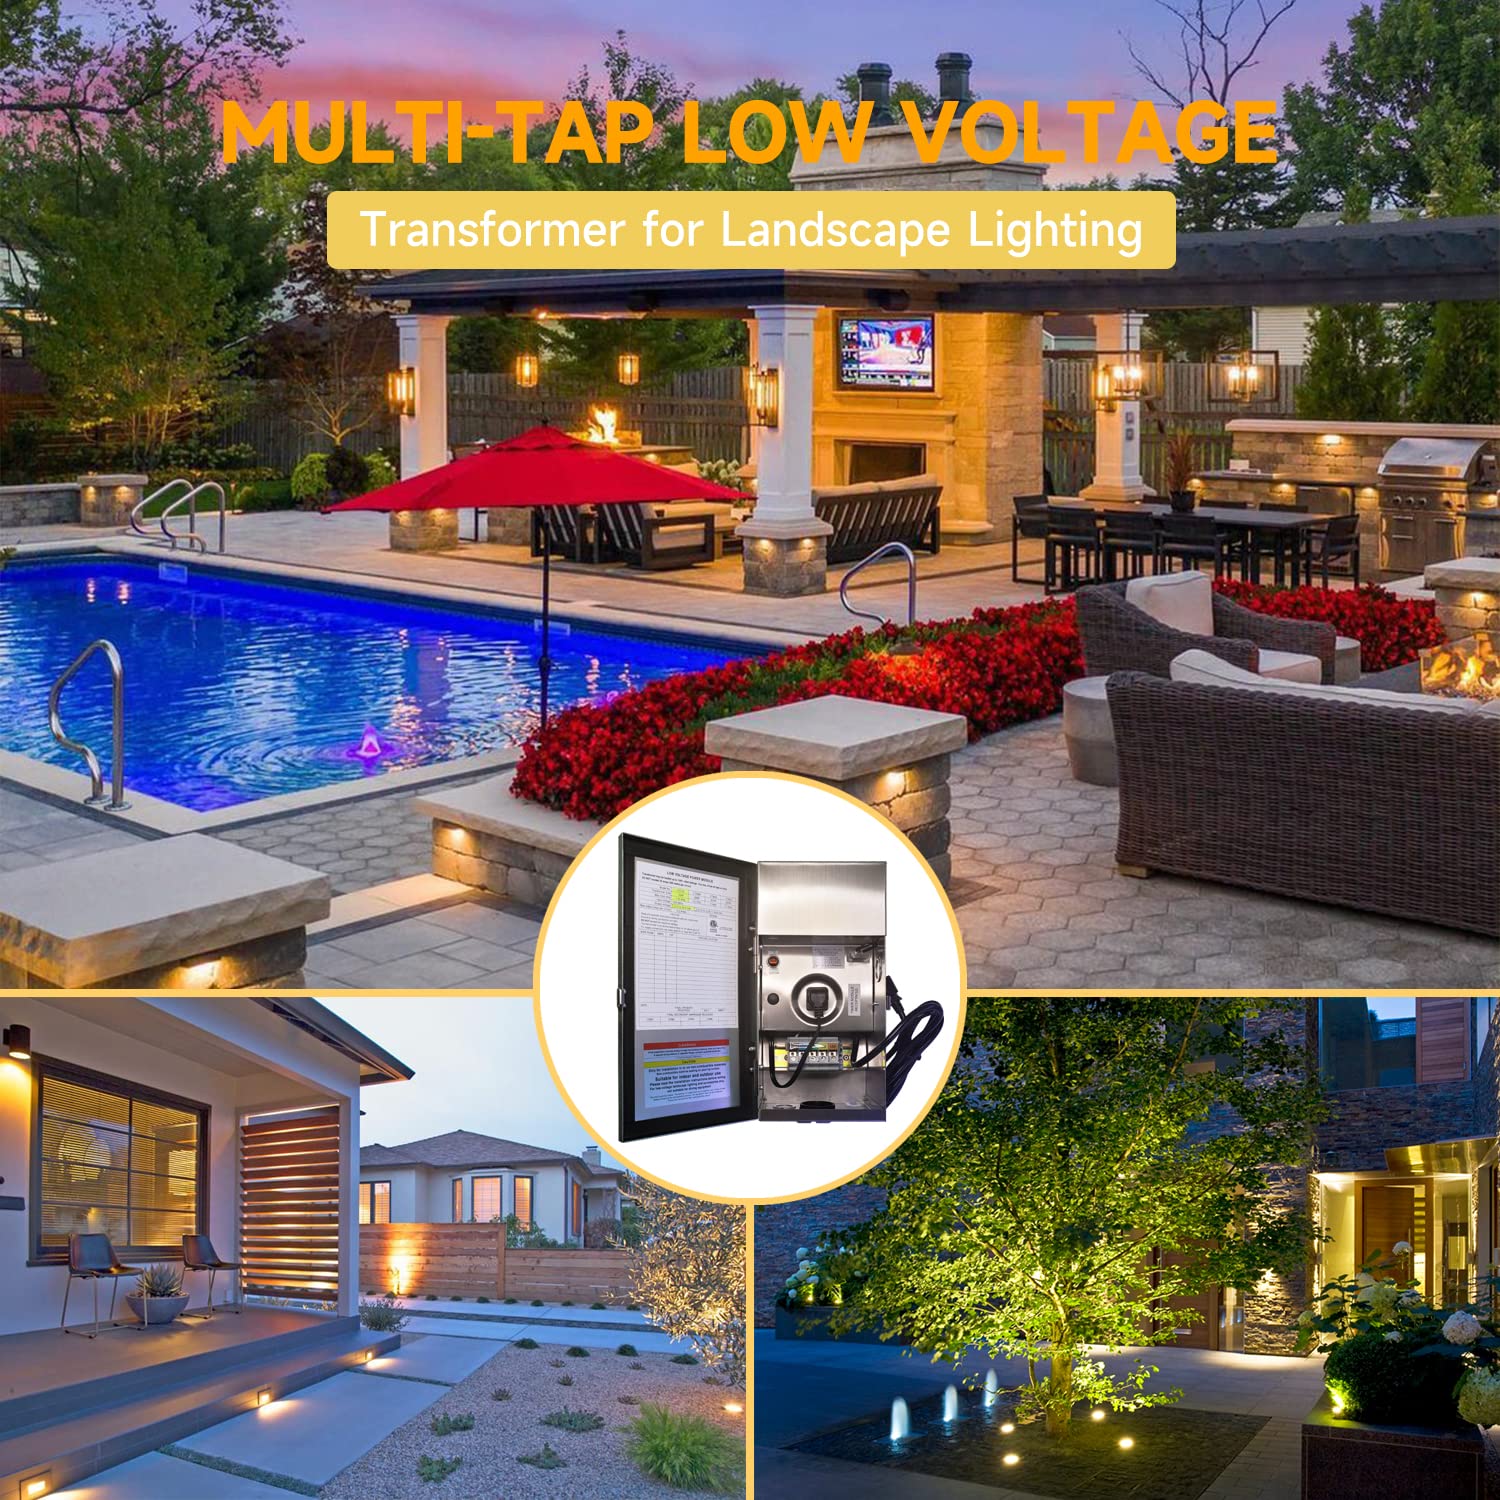 Outdoor spaces illuminated with landscape lighting, featuring poolside seating, modern home entryway, and garden path. Central inset of transformer for landscape lighting with controls. Text: Multi-Tap Low Voltage Transformer for Landscape Lighting.